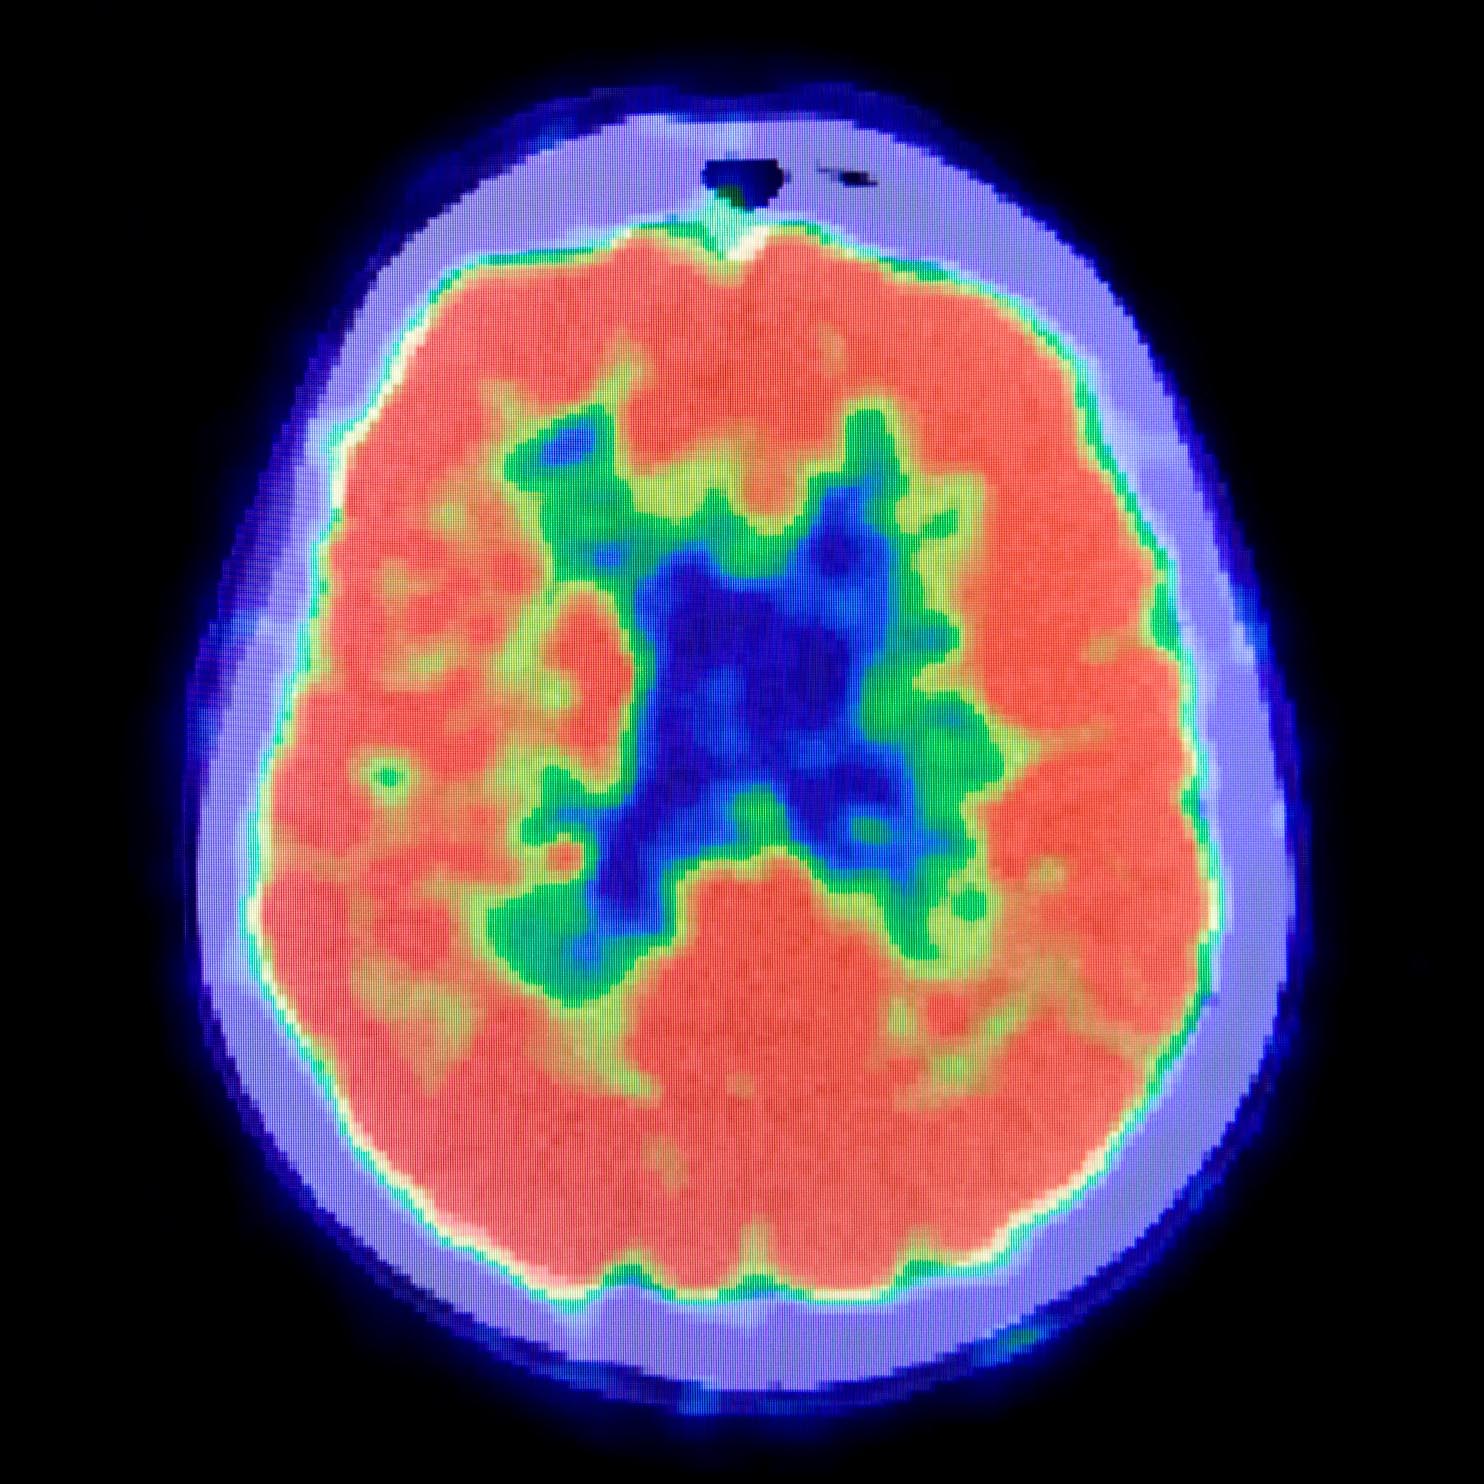 Positron Emission Topography (PET) image of a brain in bright red and skull in bright blue with yellows, greens and deep blues in the center